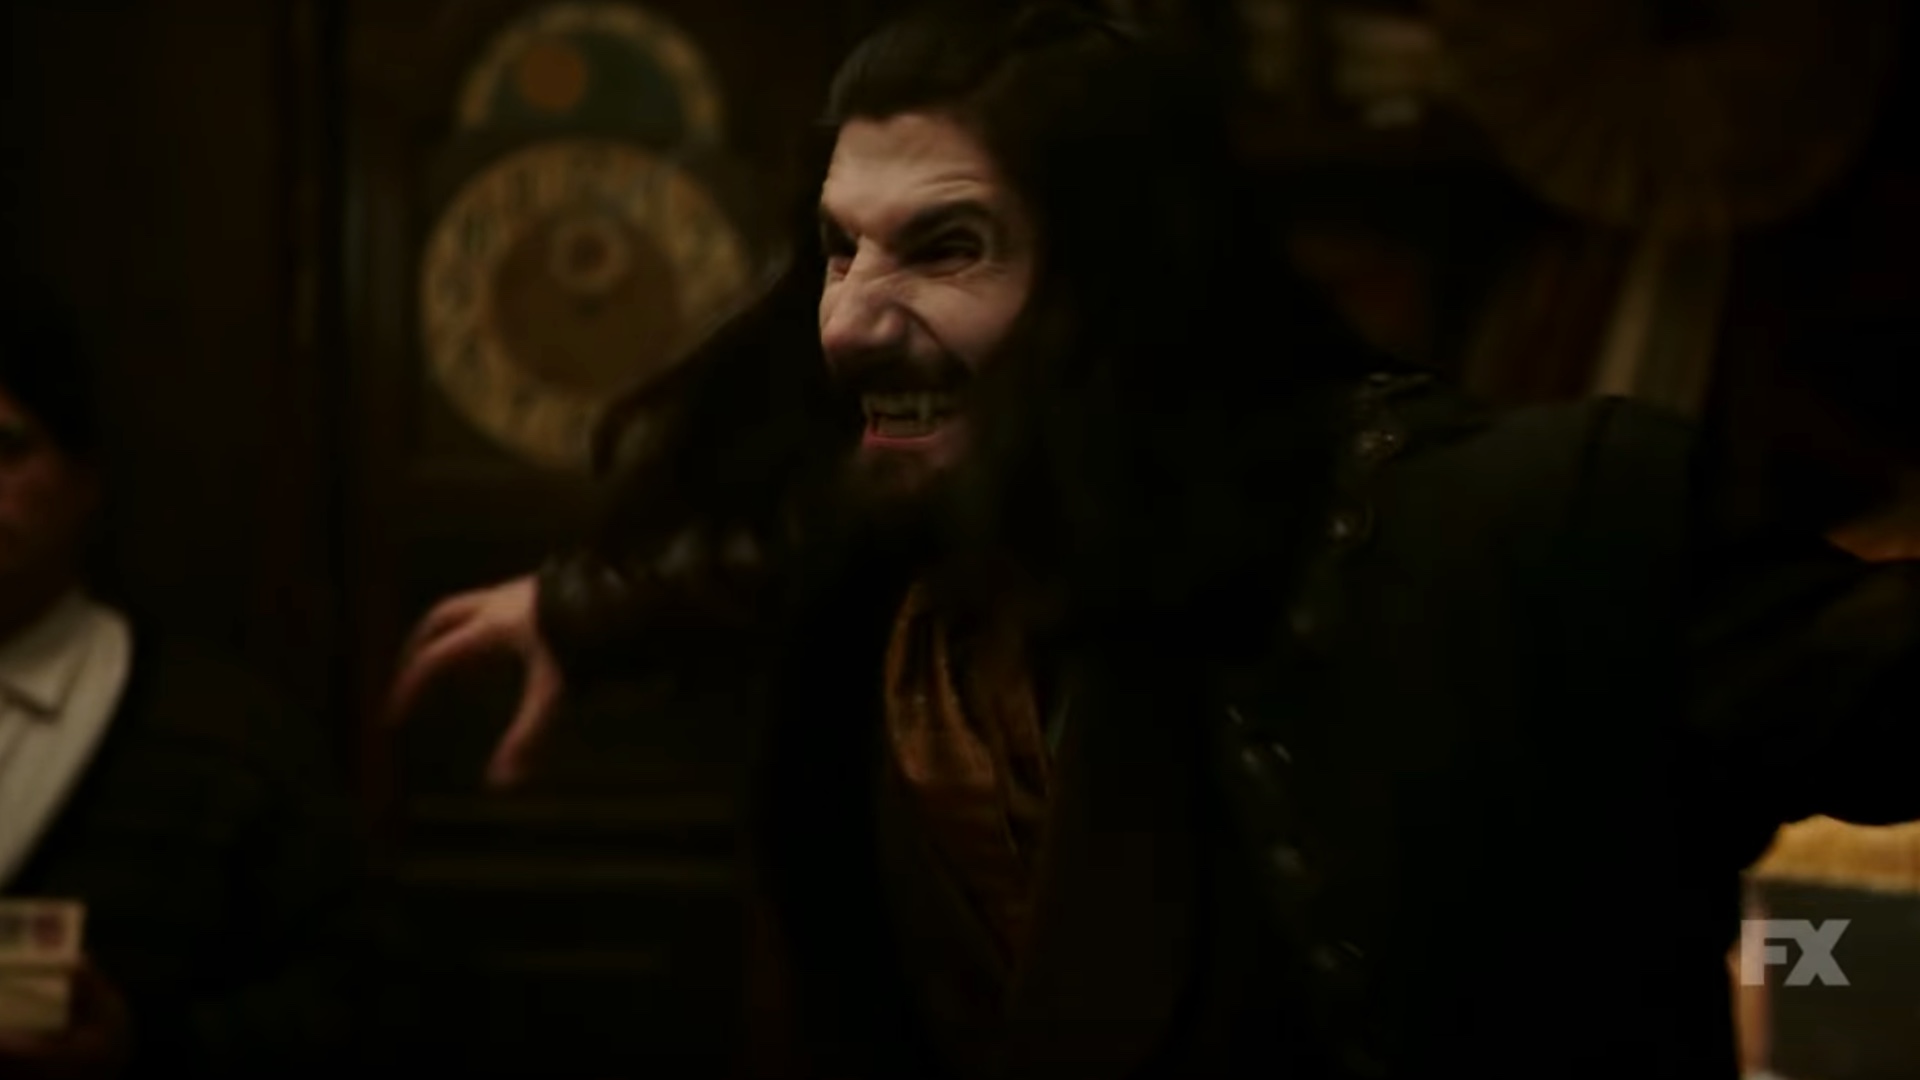 Funny Full Trailer for FX's WHAT WE DO IN THE SHADOWS Series From Taik...